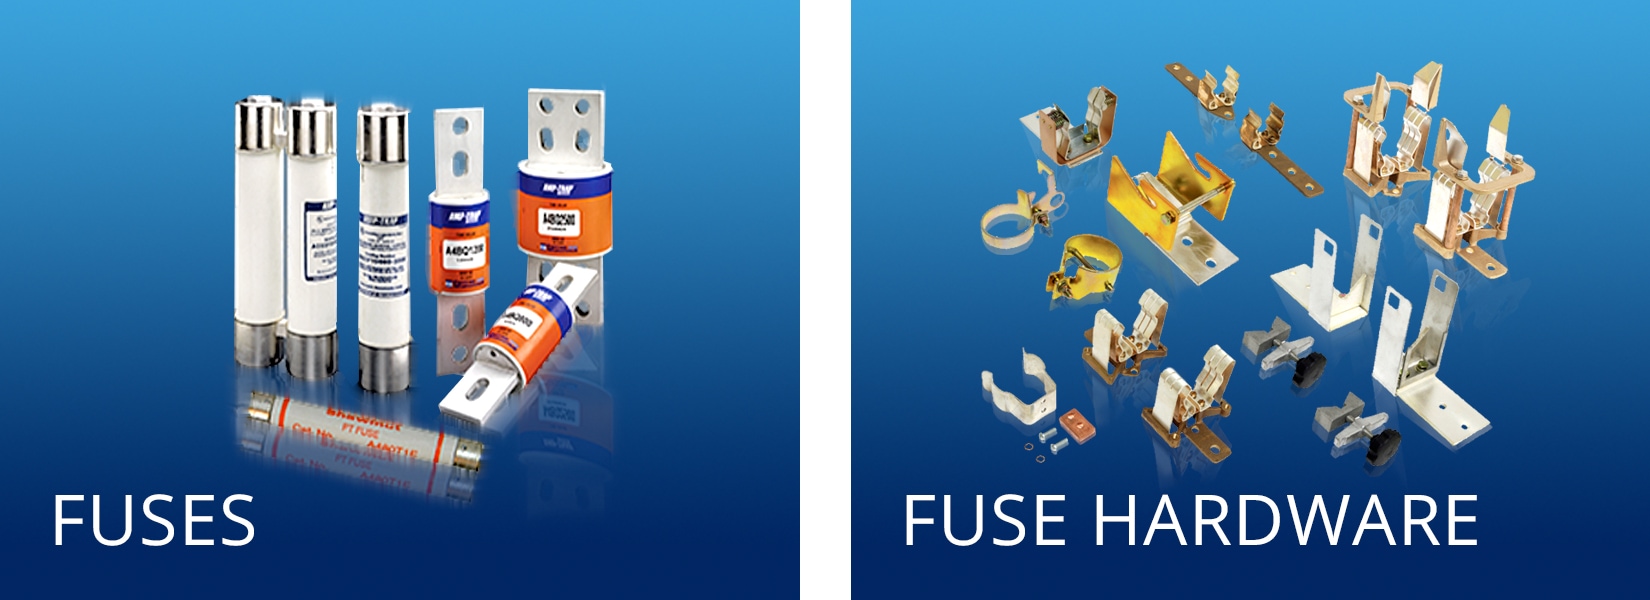 Fuses-and-fuse-hardware